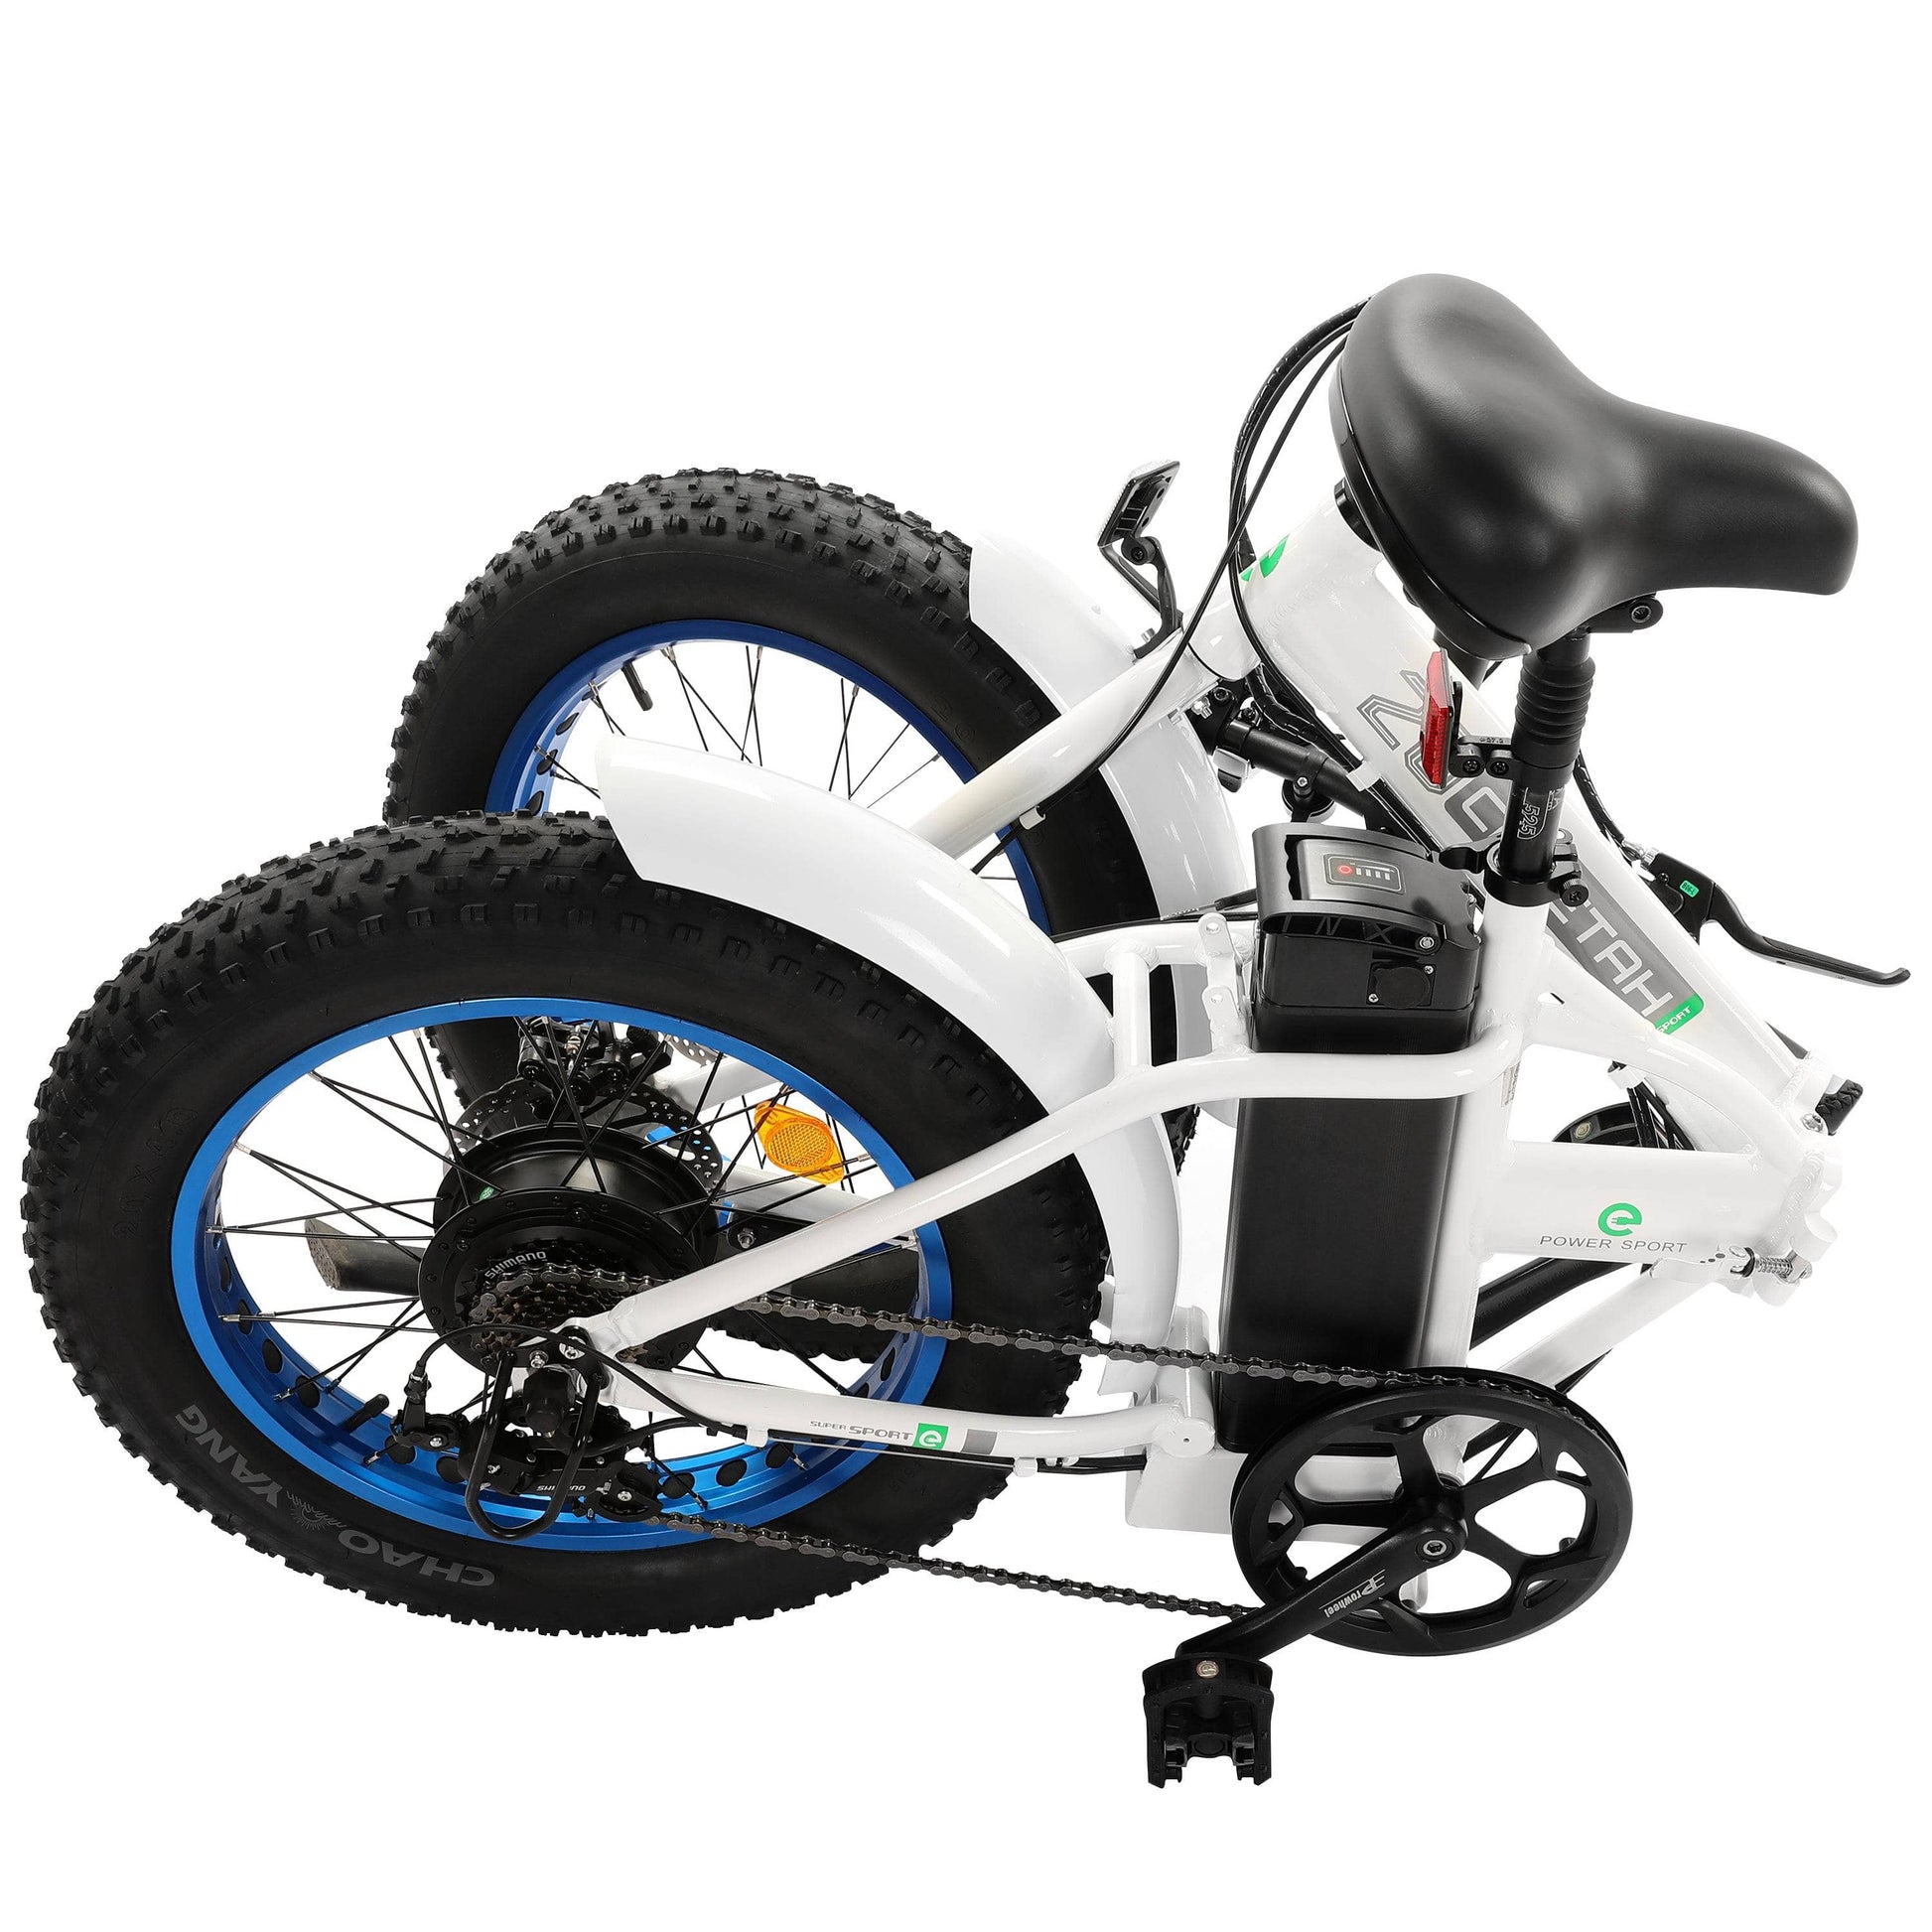 Ecotric Electric Bikes Ecotric 20" 36V 500W Fat Tire Folding Electric Bike